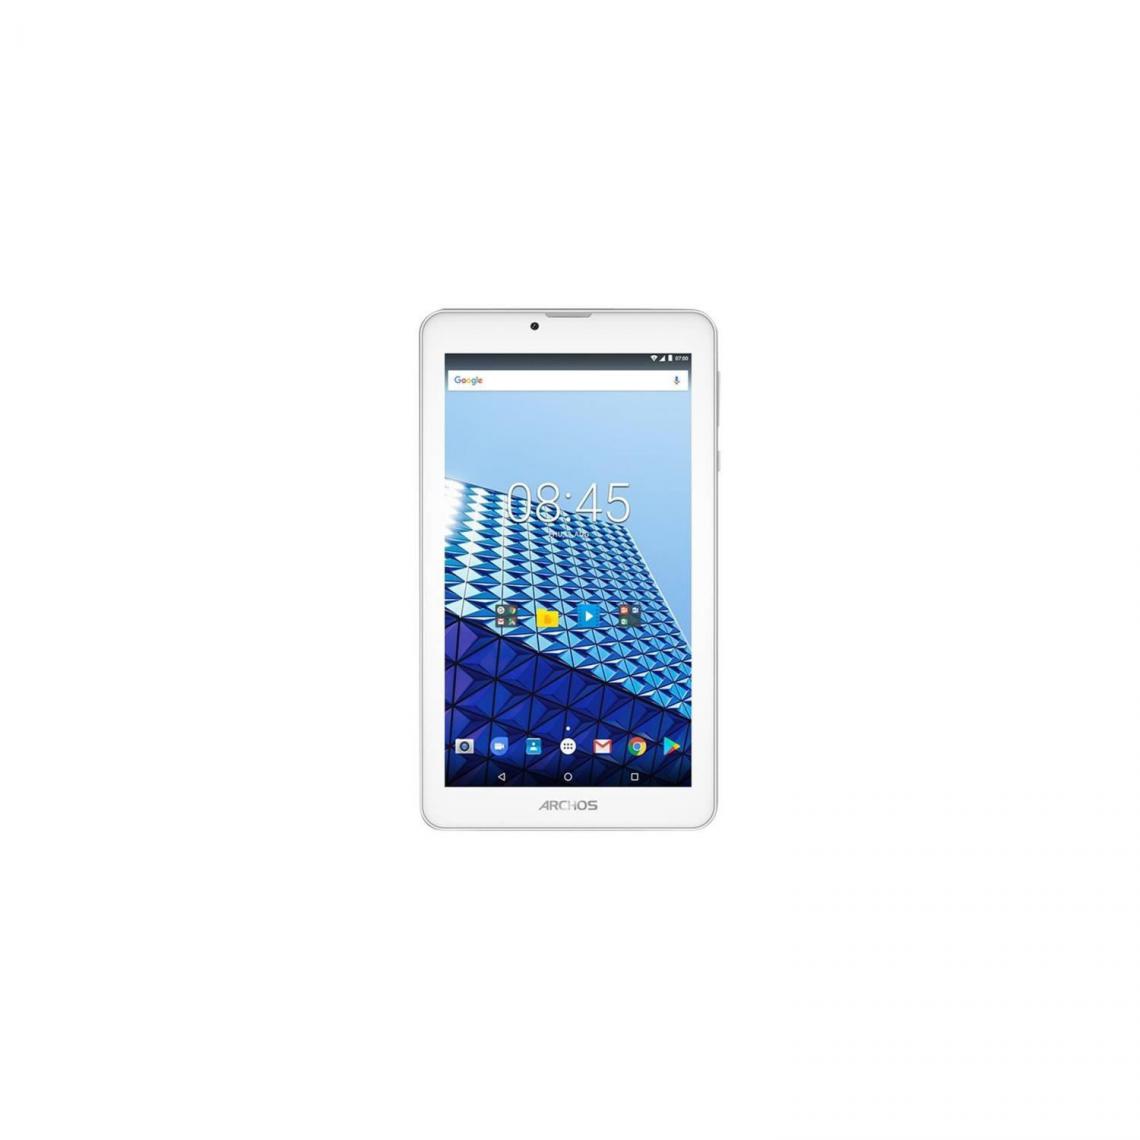 Archos - Tablette Tactile - ARCHOS - Access 70 Wi-Fi - 7 - Quad core - RAM 1 Go - Stockage 16 Go - Android 8.1 Oreo Go - Tablette Android